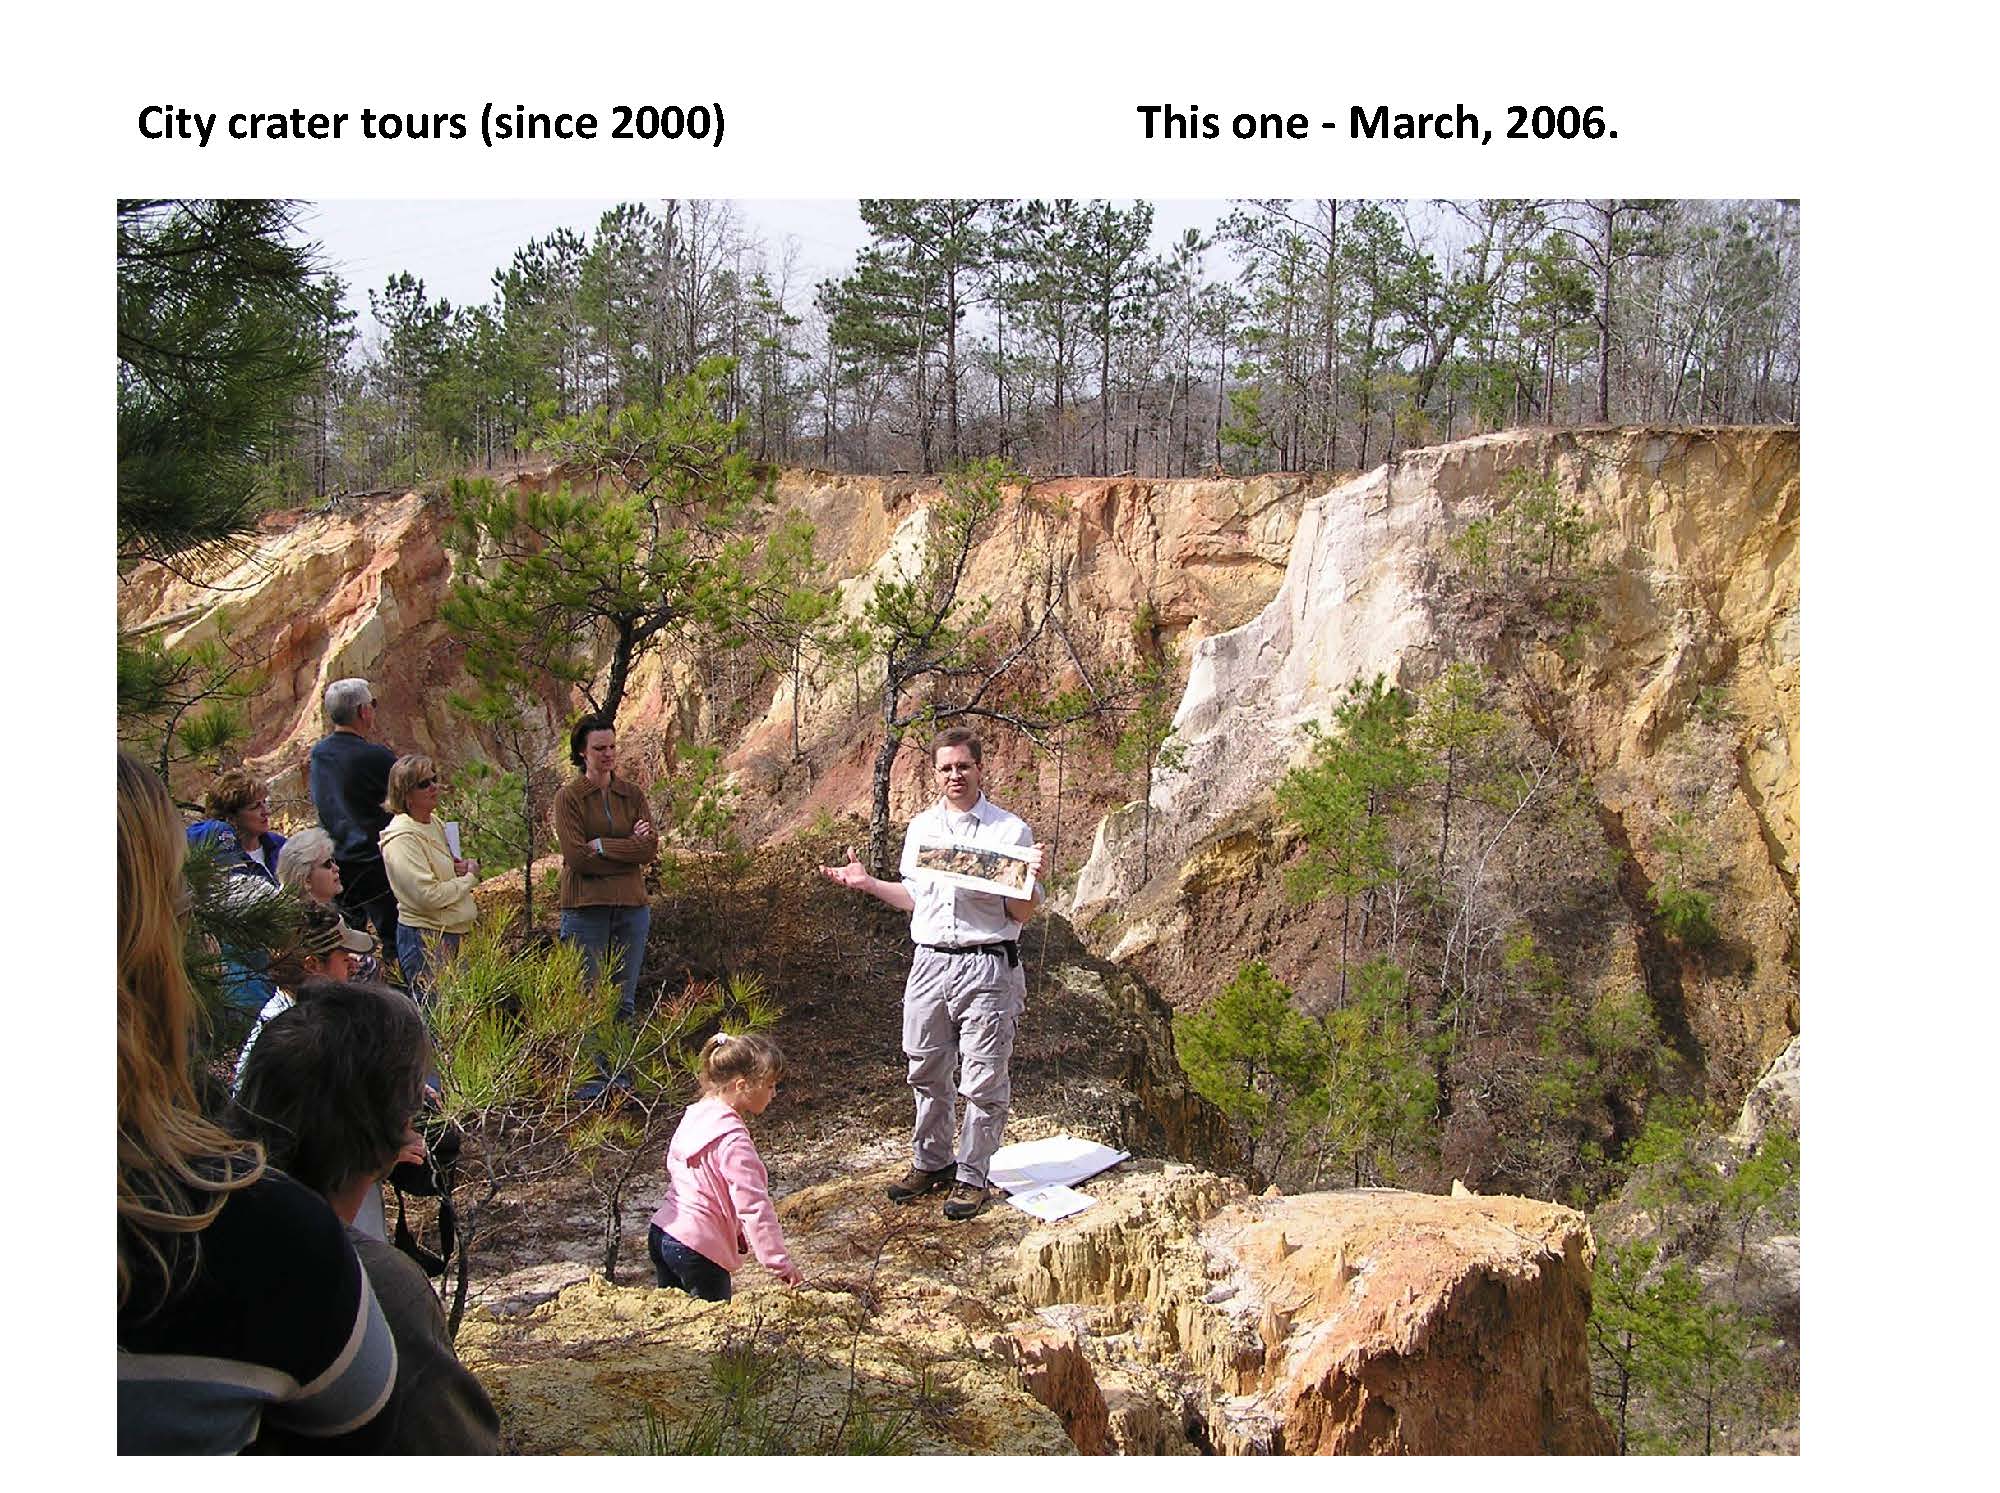 People attending a crater tour in March 2006